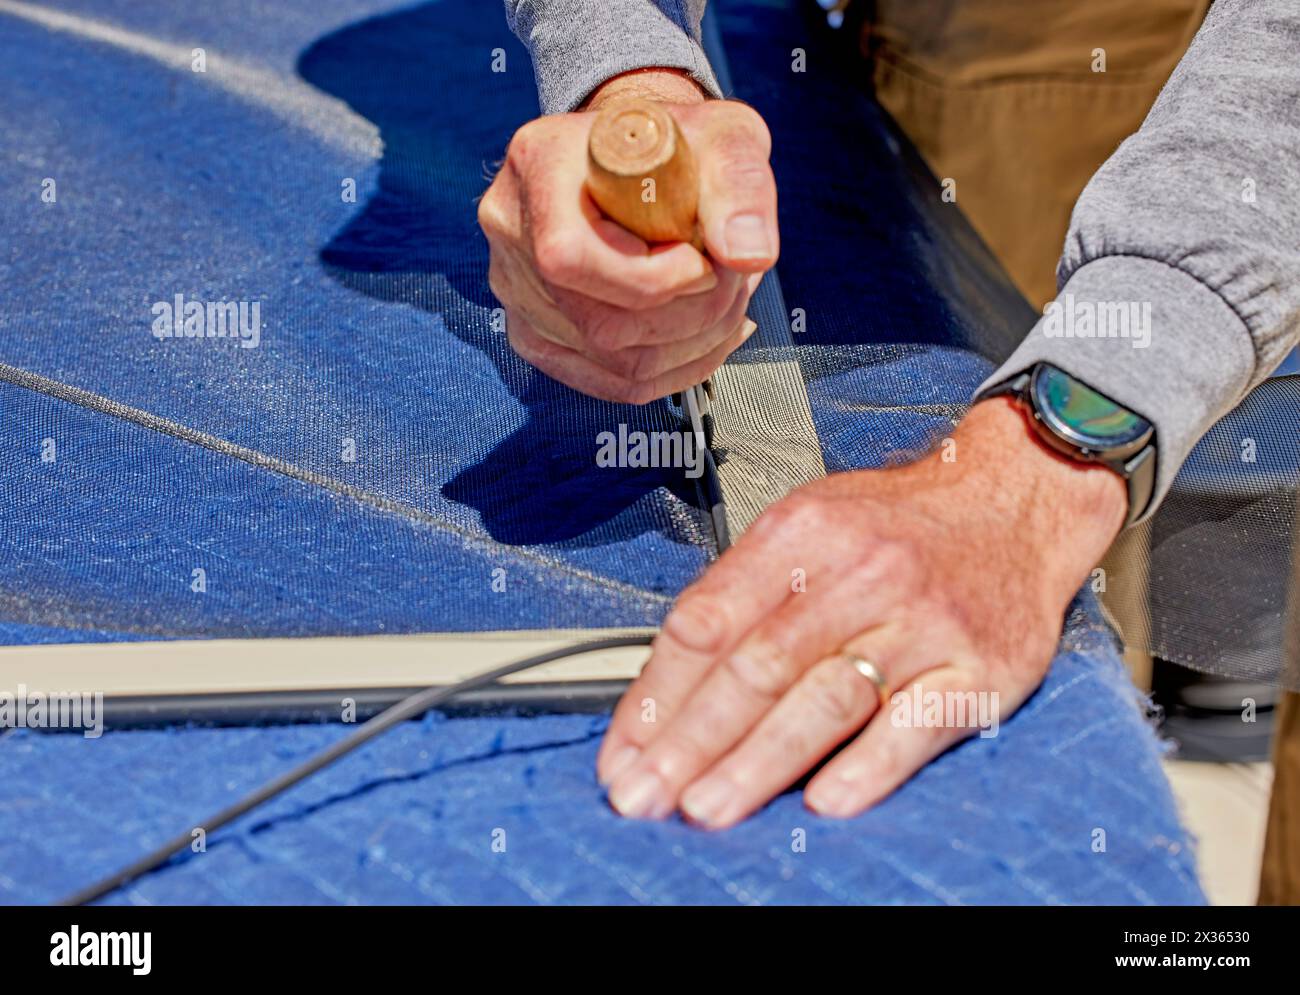 Close up the hands of a man holding a screen roller replacing a window screen into a window frame Stock Photo